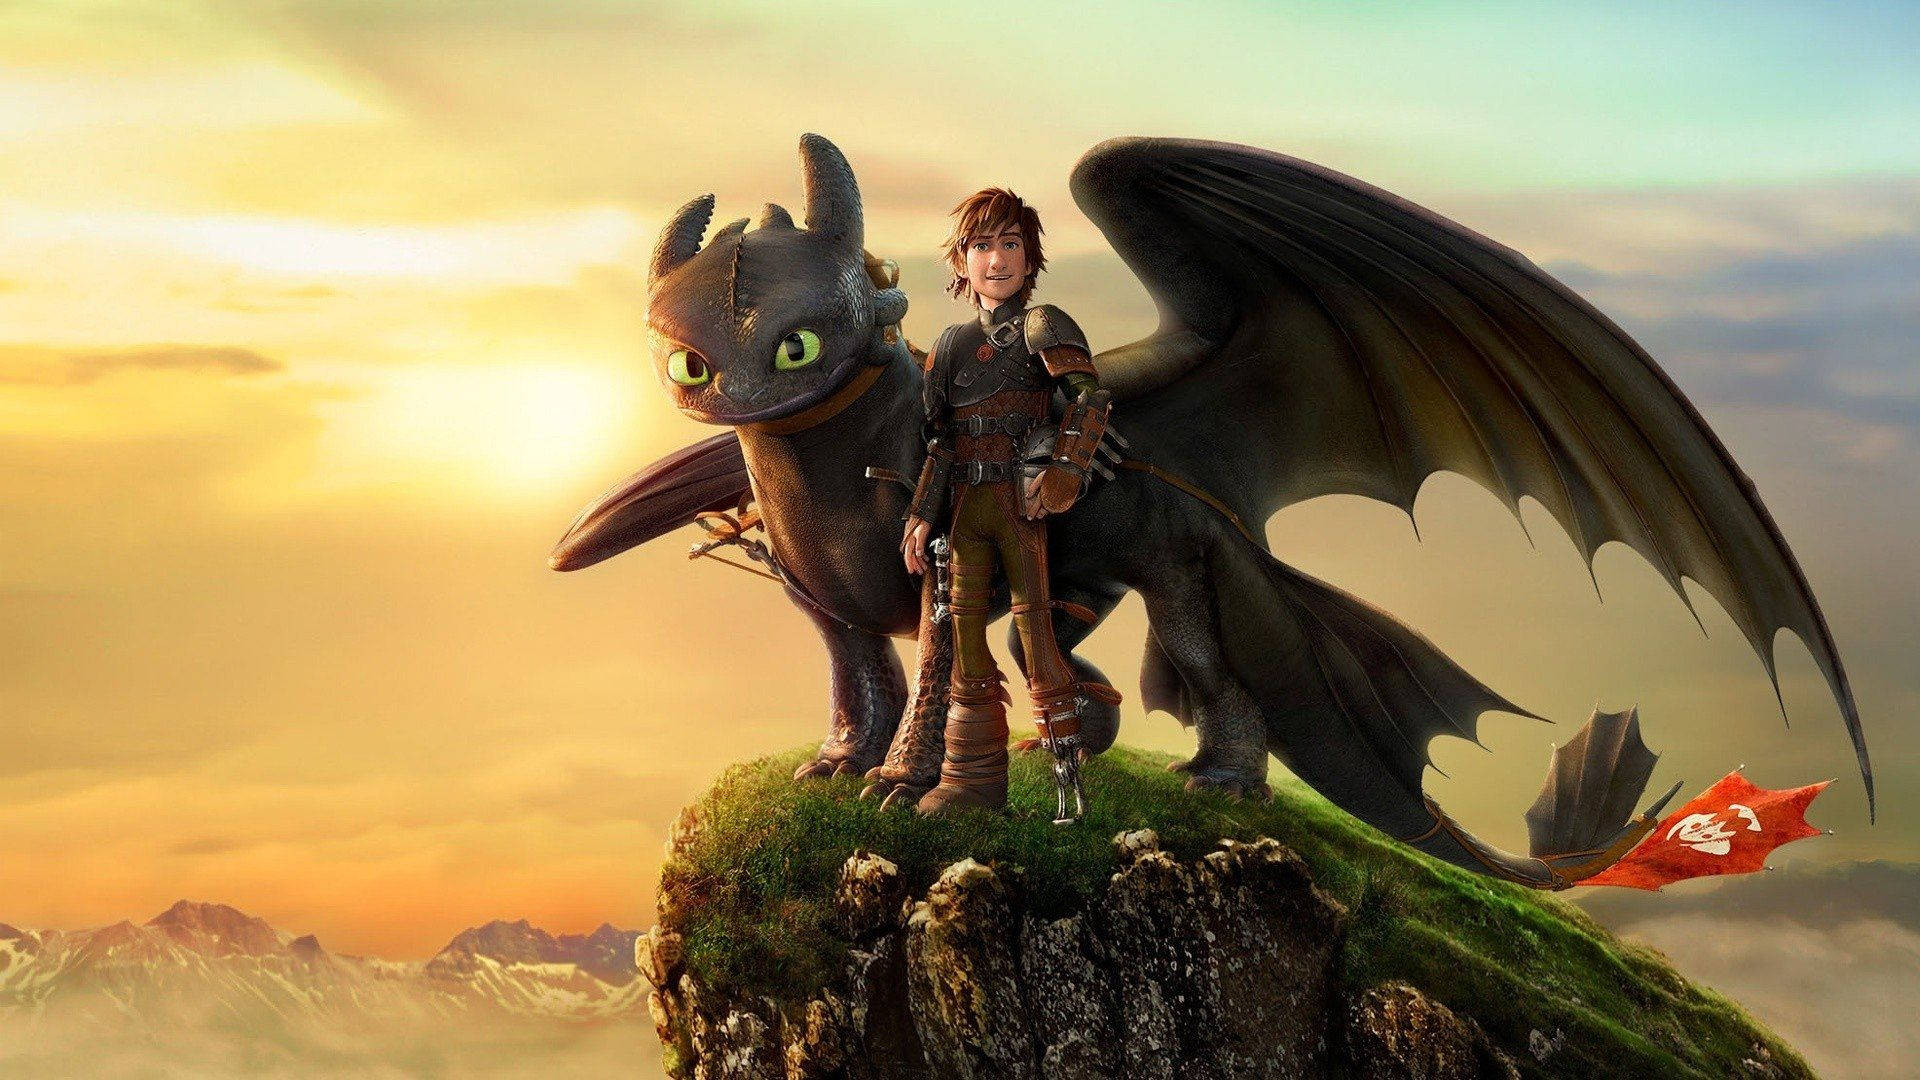 How To Train Your Dragon At Mountain Peak Wallpaper